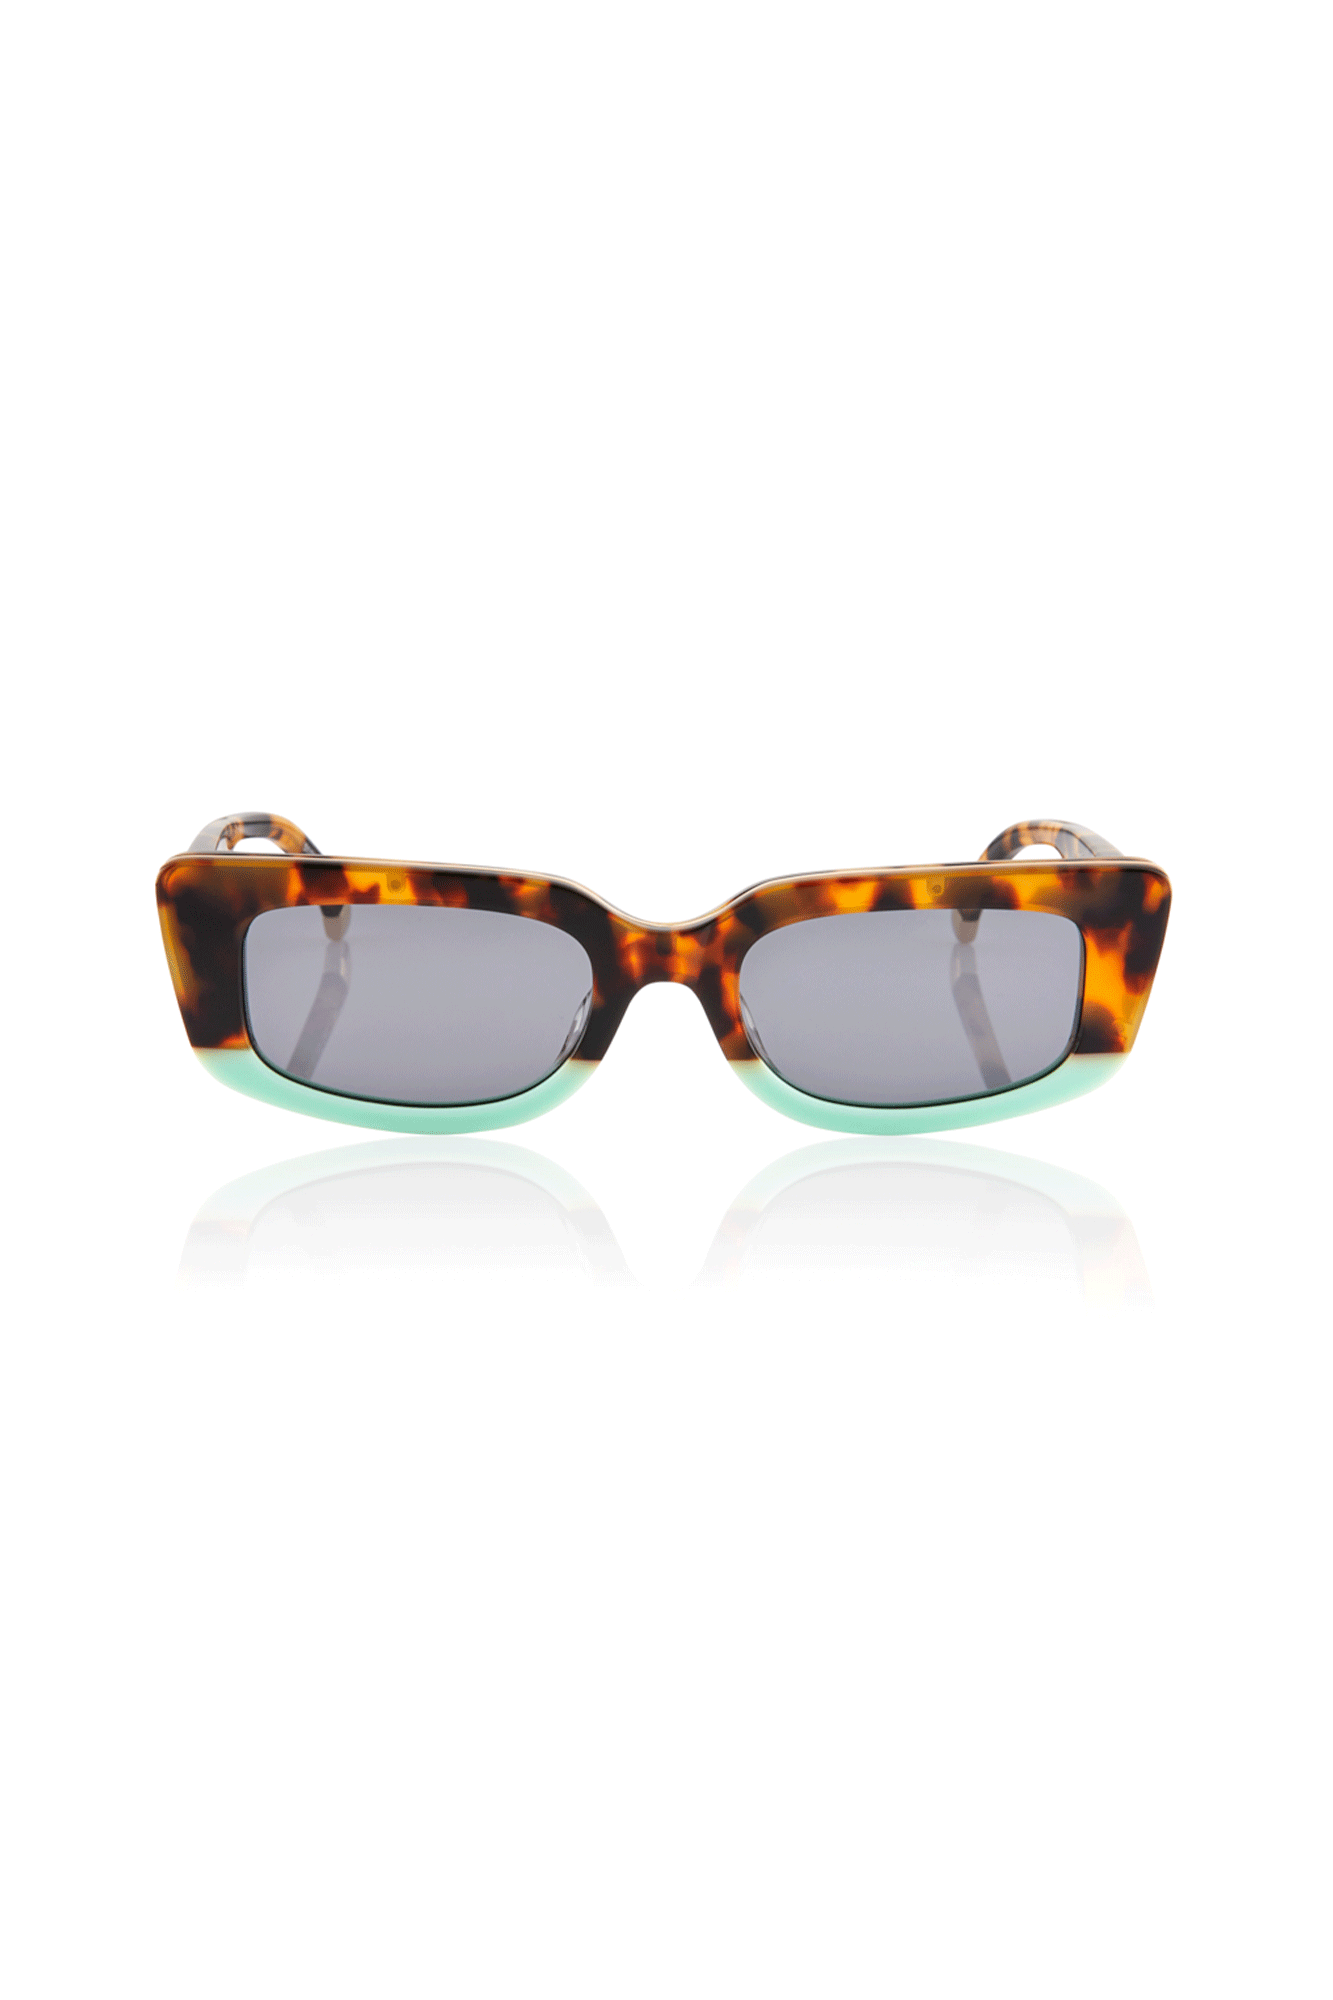 The Suria frame from Oscar x Frank combines style and function for the perfect accessory. Featuring black Essilor lenses with inner anti-glare protection, beveled temples with gold accents, and custom Tiger Tort/Mint Laminated Italian acetate, you can look good while protecting your eyes. A gender-neutral design makes it perfect for any outfit.